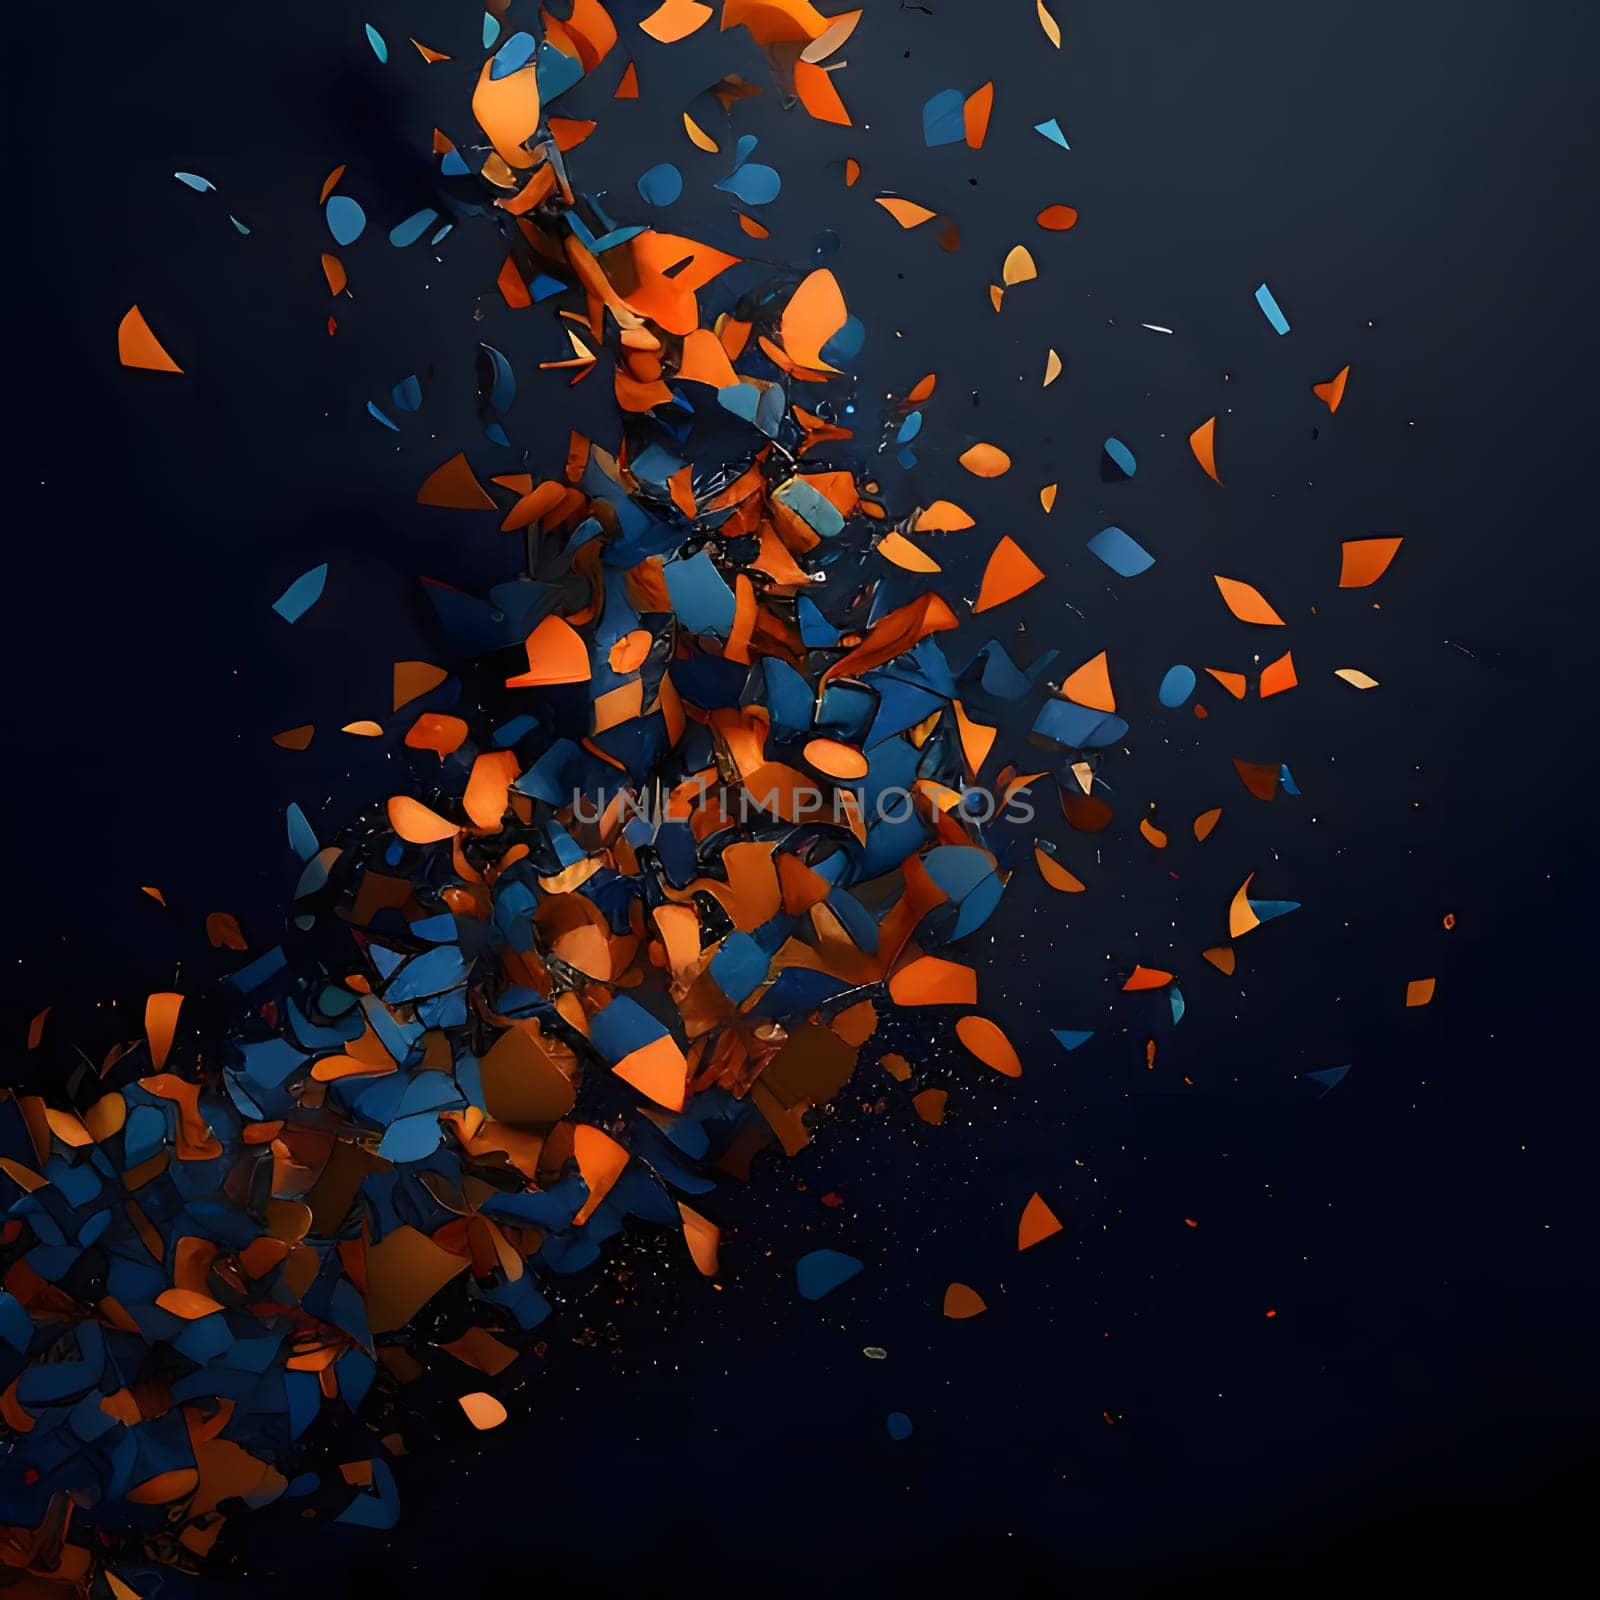 Orange and dark blue confetti on a dark background. New Year's fun and festivities. A time of celebration and resolutions.